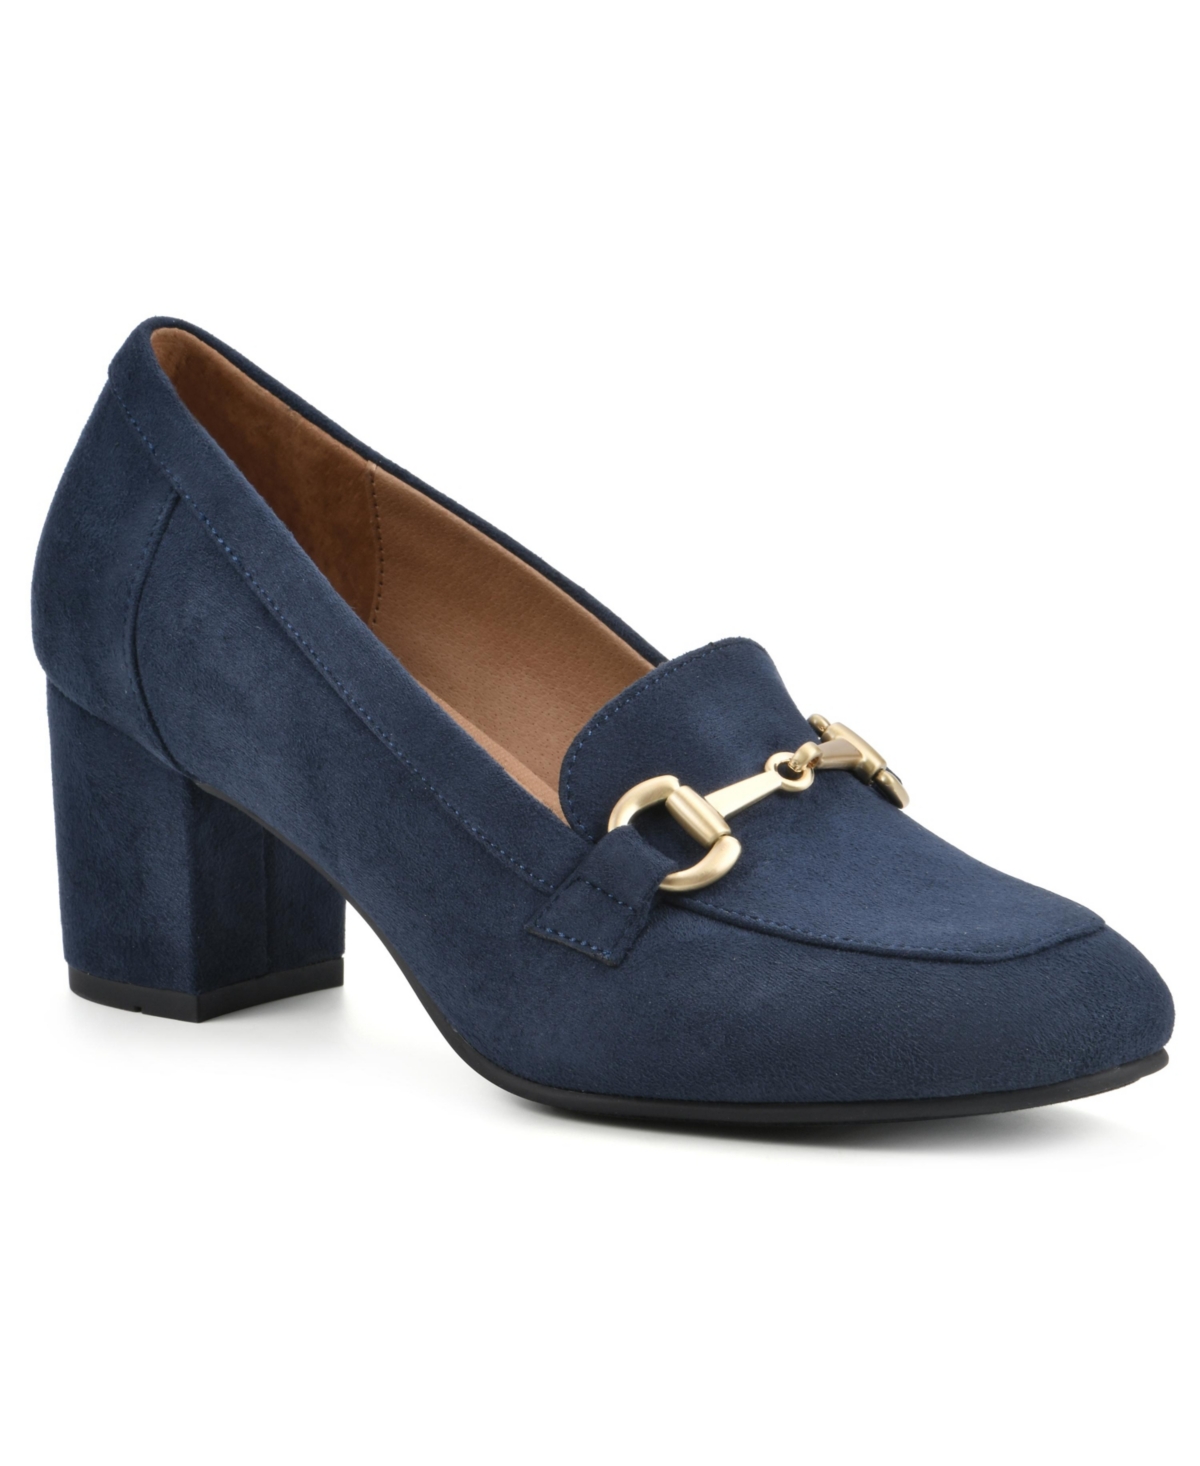 Women's Freehold Heeled Loafers - Navy Fabric